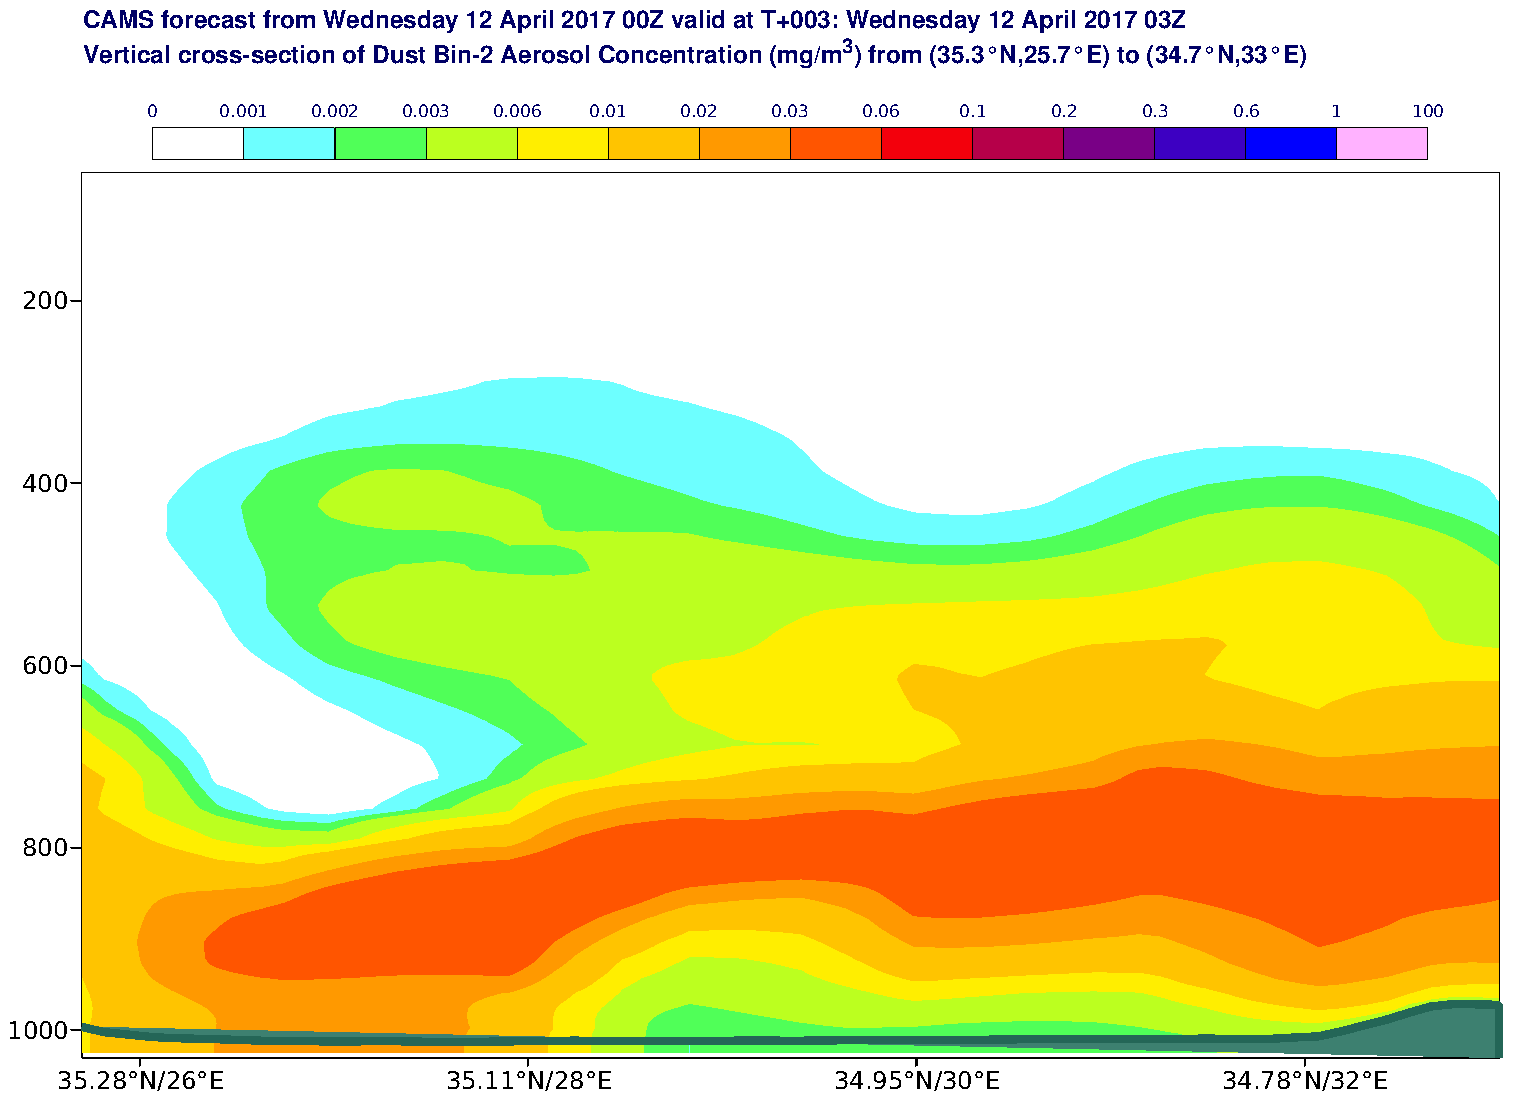 Vertical cross-section of Dust Bin-2 Aerosol Concentration (mg/m3) valid at T3 - 2017-04-12 03:00